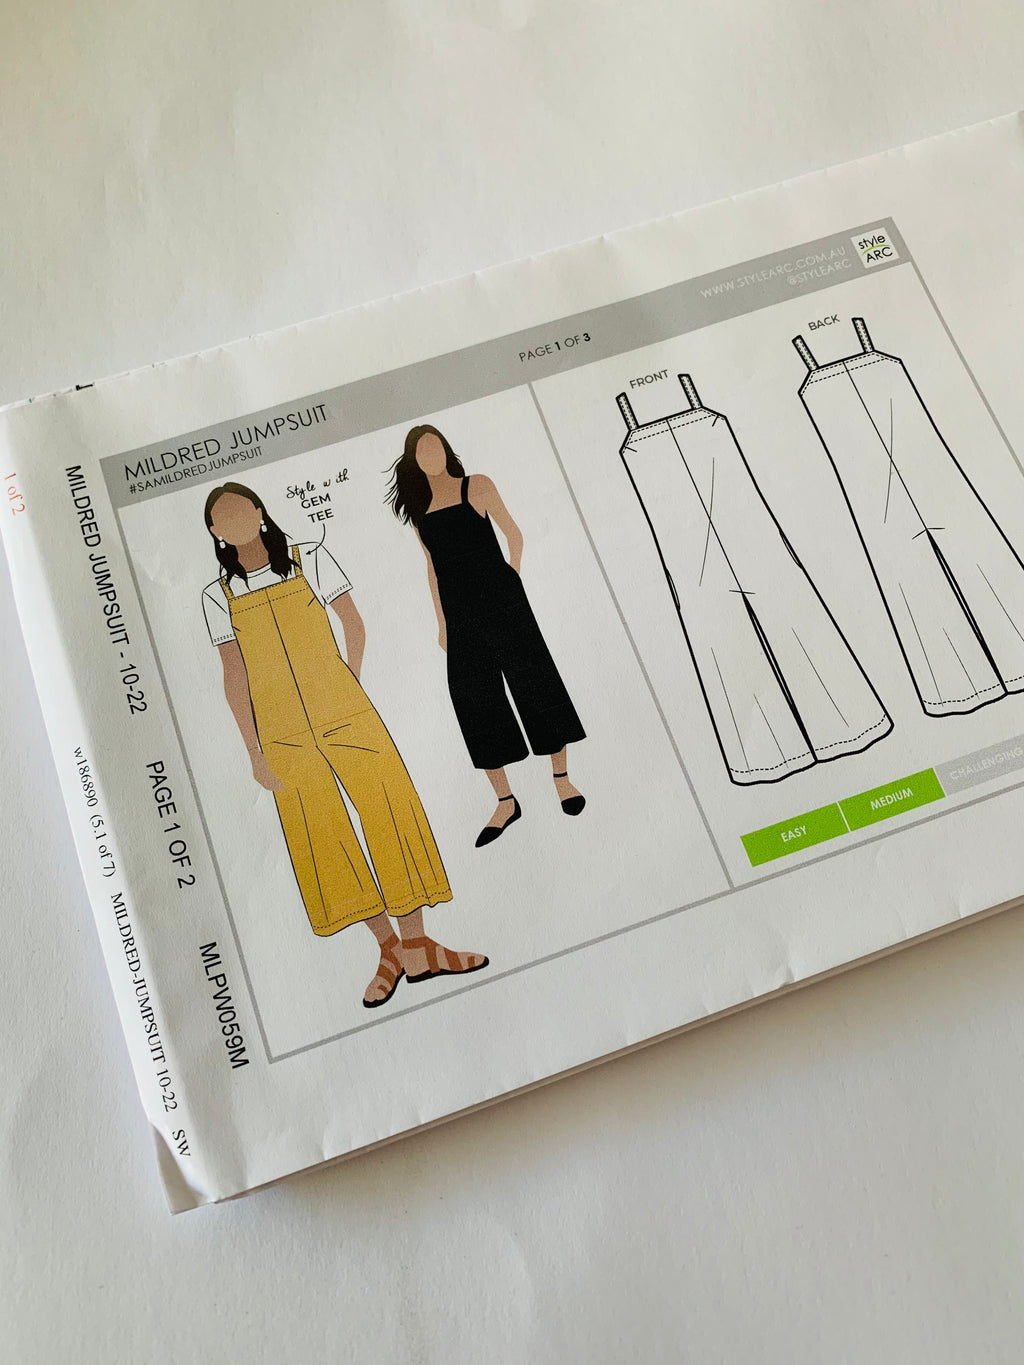 SALE  Style Arc: Mildred Jumpsuit sewing pattern